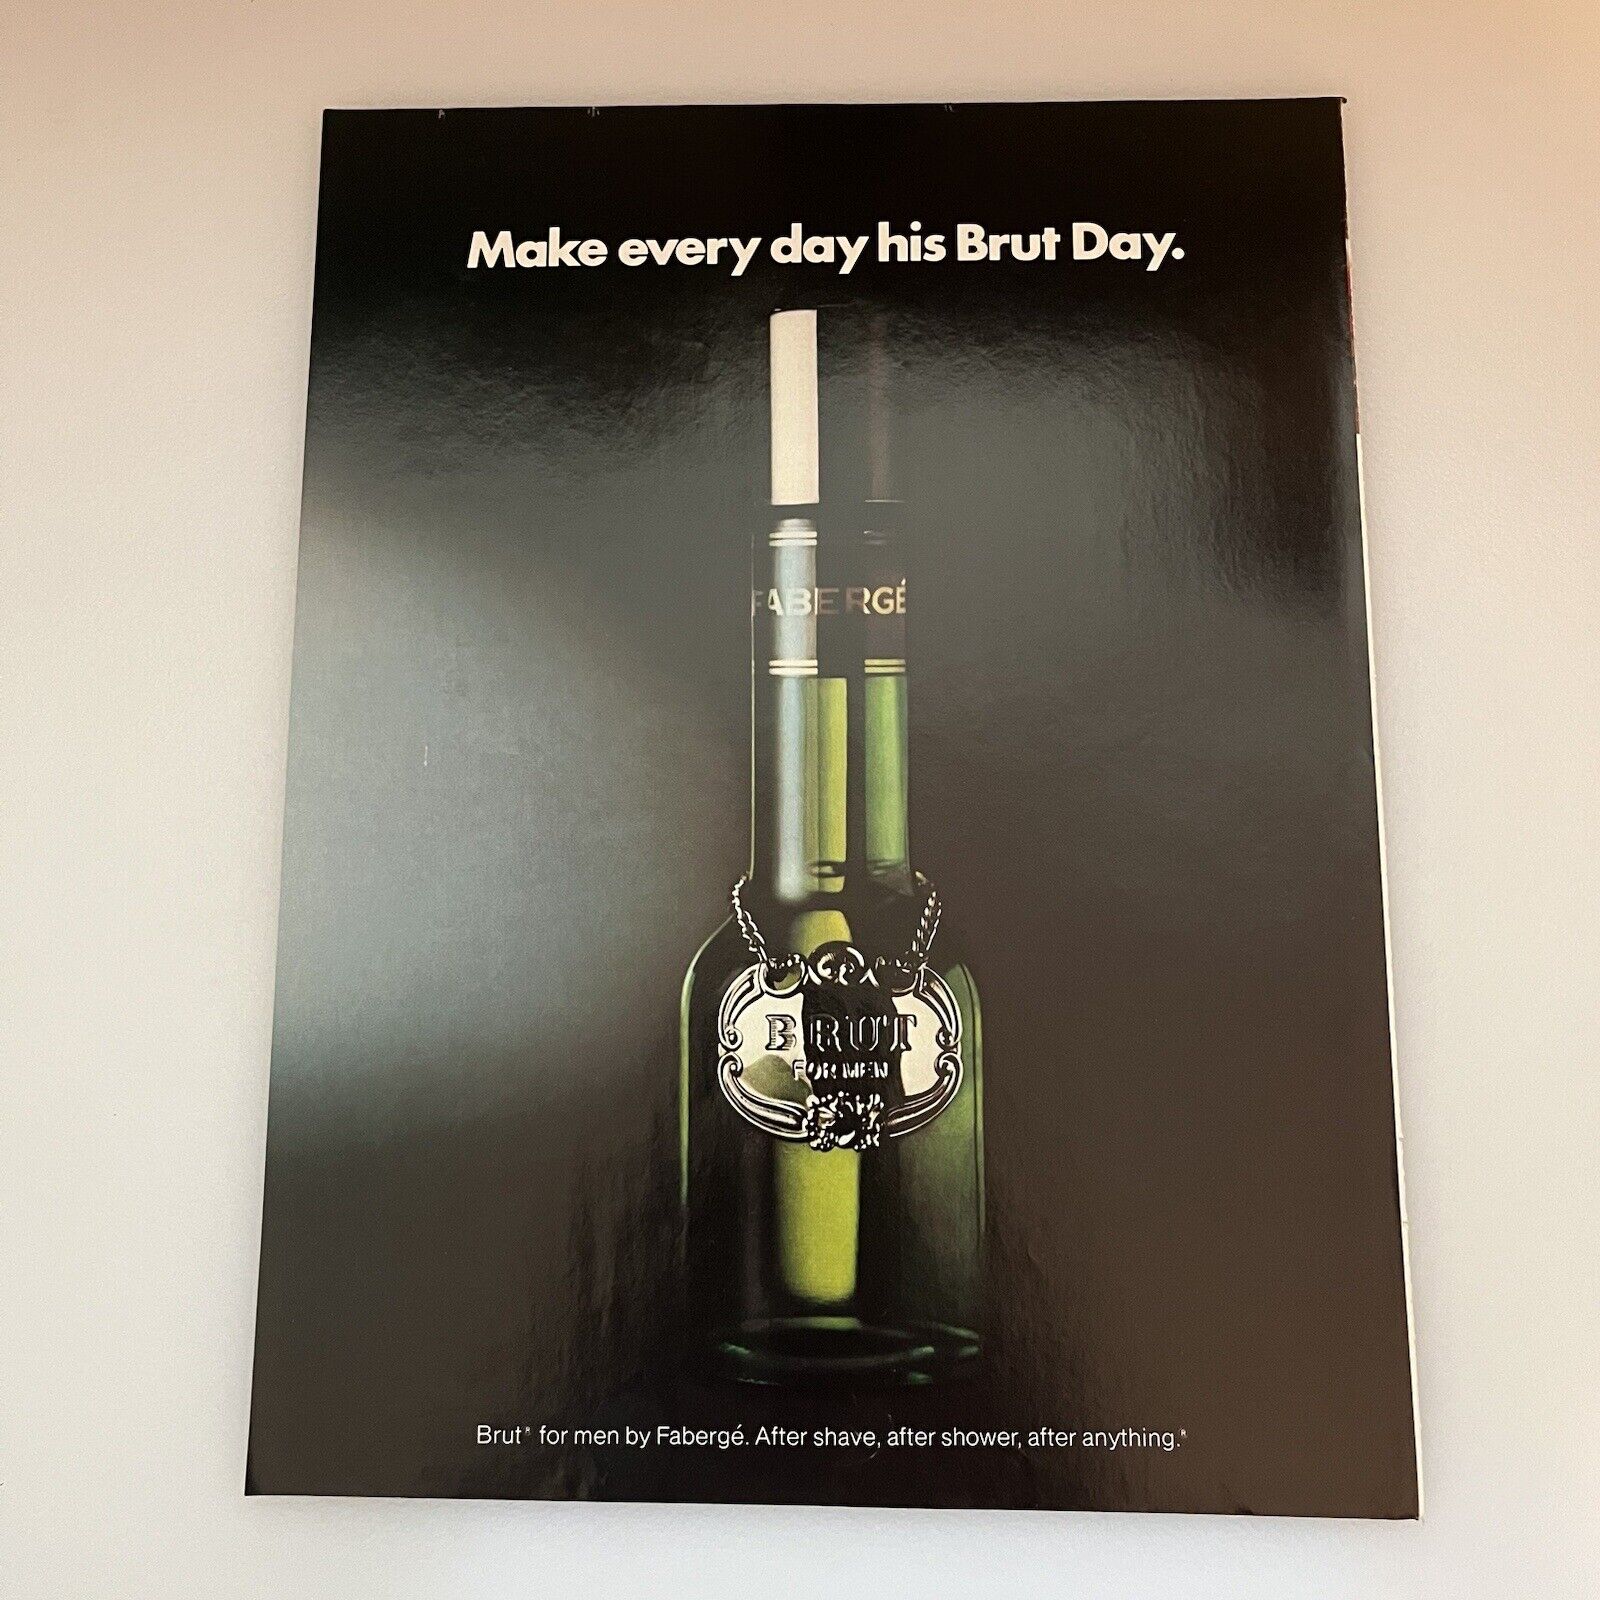 1981 Faberge Brut Cologne Print Ad Original Vintage Make Every Day His Brut Day